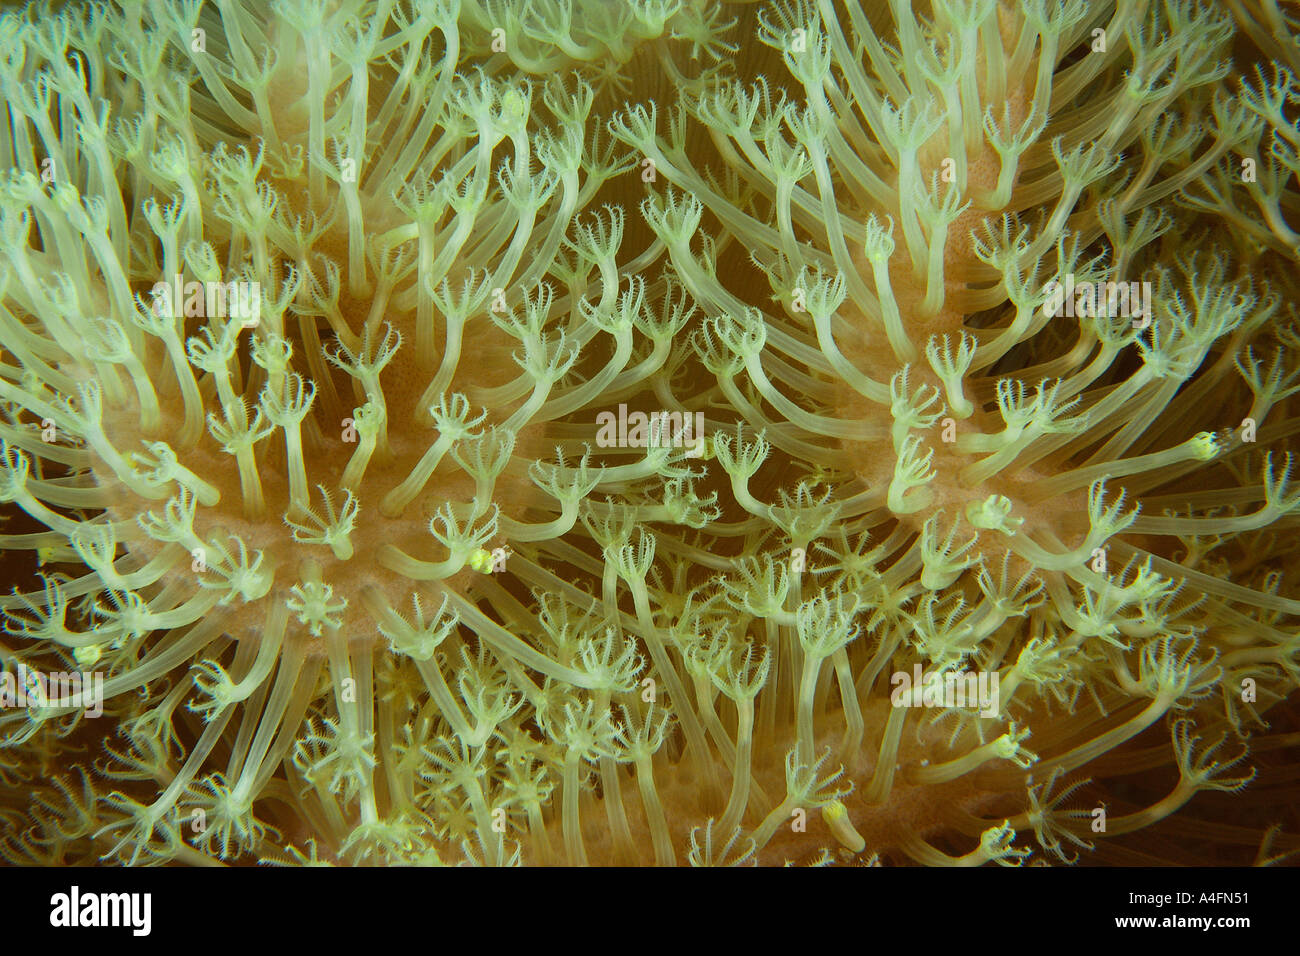 Leather coral Sarcophytum sp polyp detail Namu atoll Marshall Islands N Pacific Stock Photo